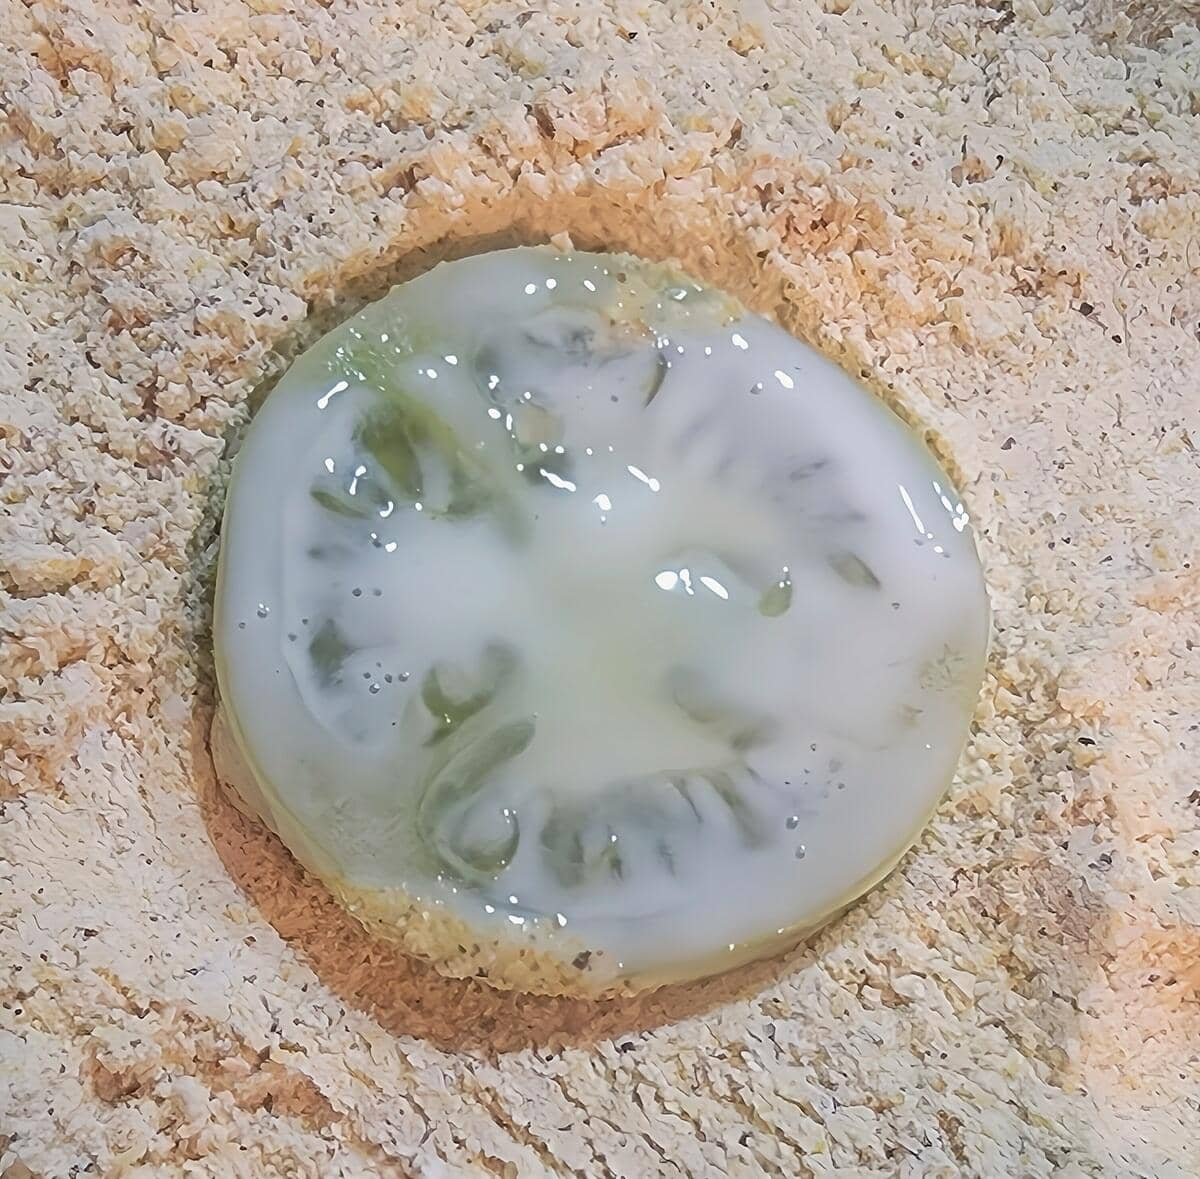 slice of green tomato laying in corn meal dredge, still coated in buttermilk on one side, waiting to be flipped over and coated on other side.